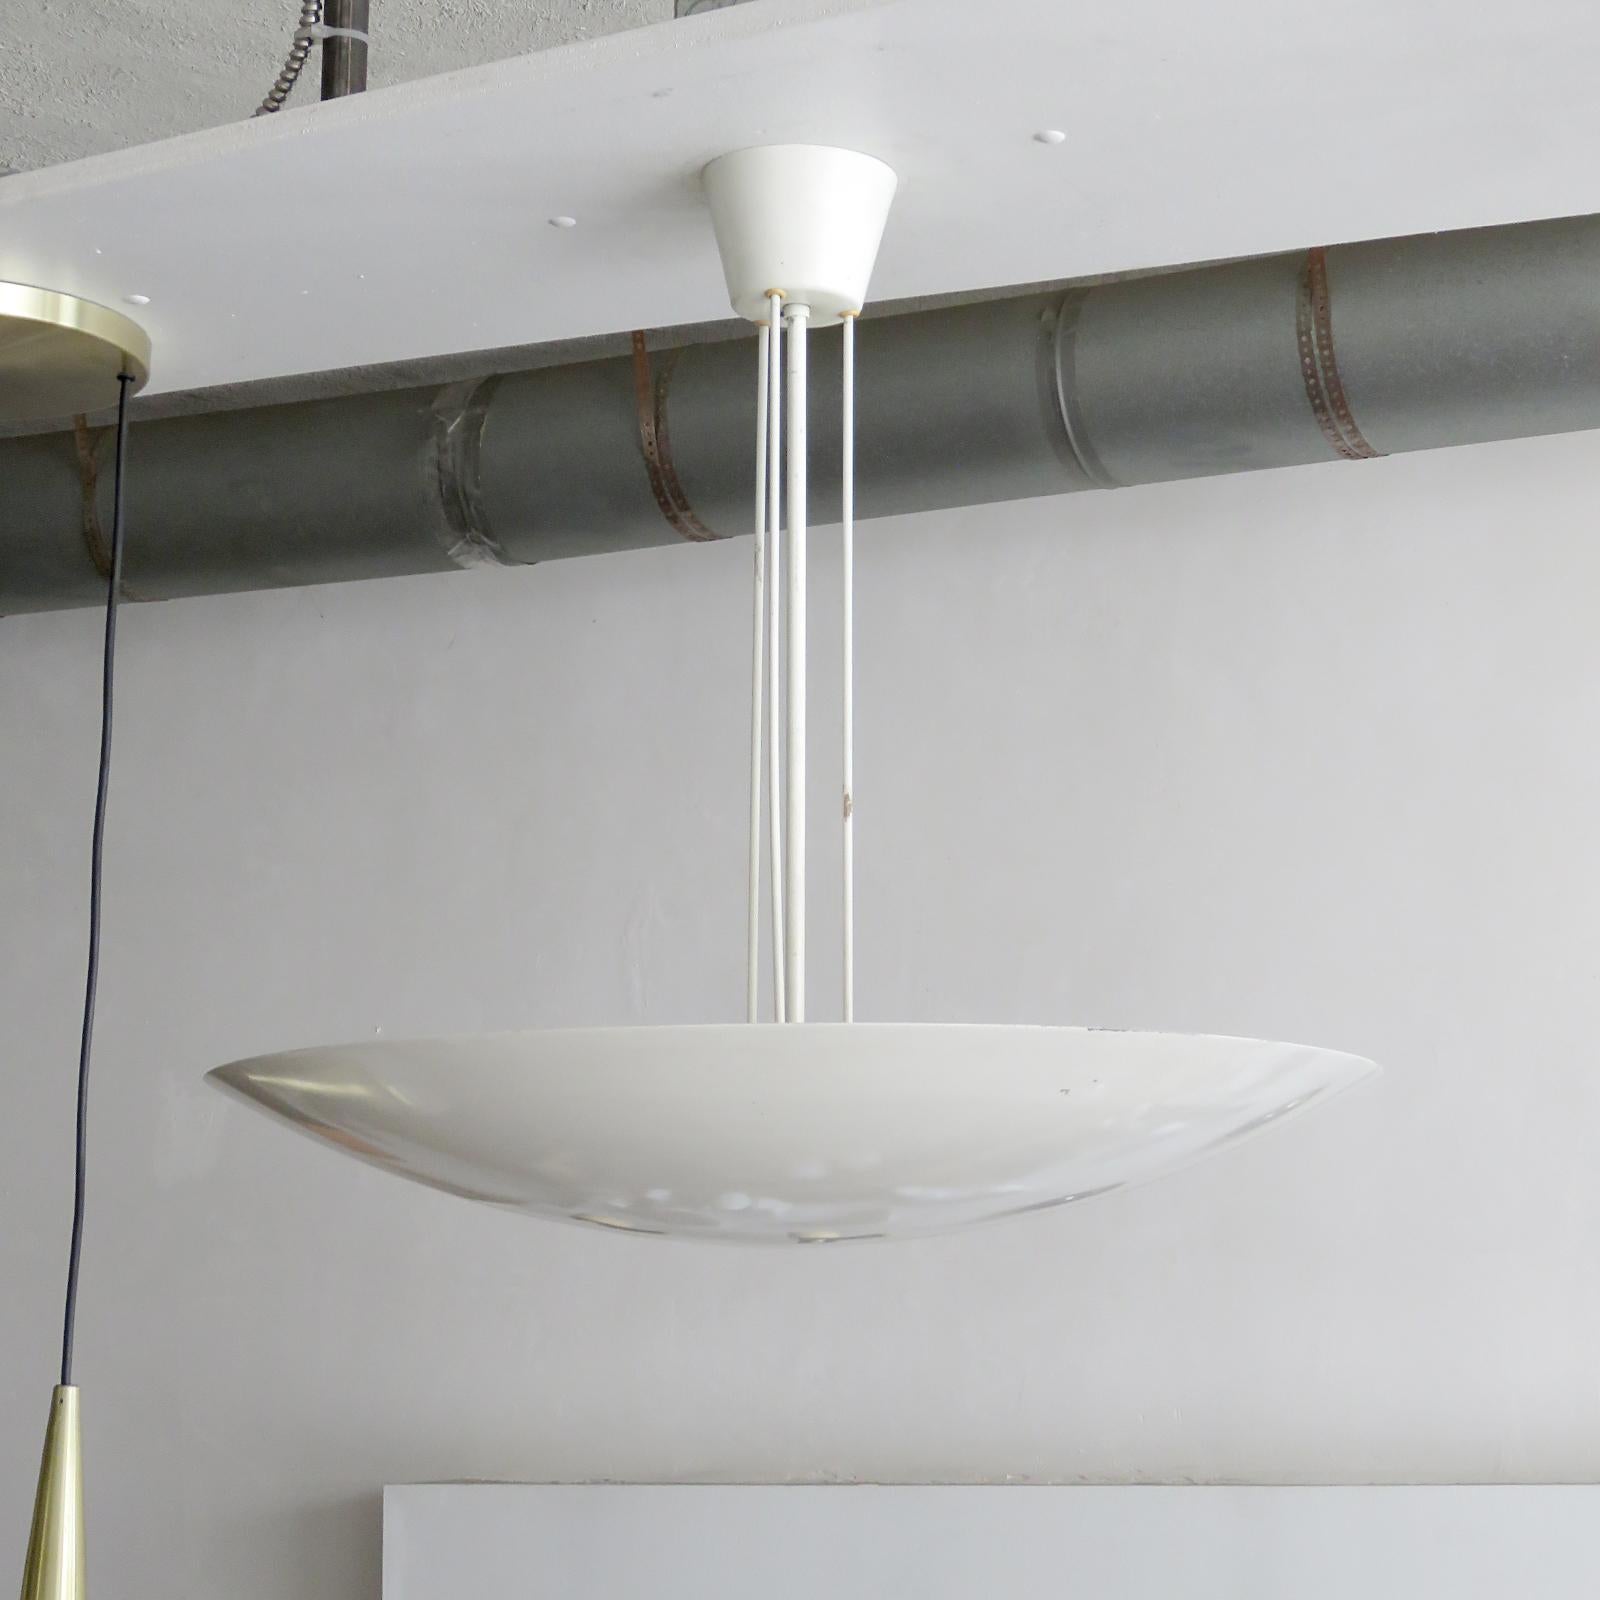 Elegant oversized white shallow bowl-shaped up light pendant by J.T. Kalmar, Austria from the early 1970s with six standard-sized sockets, marked.